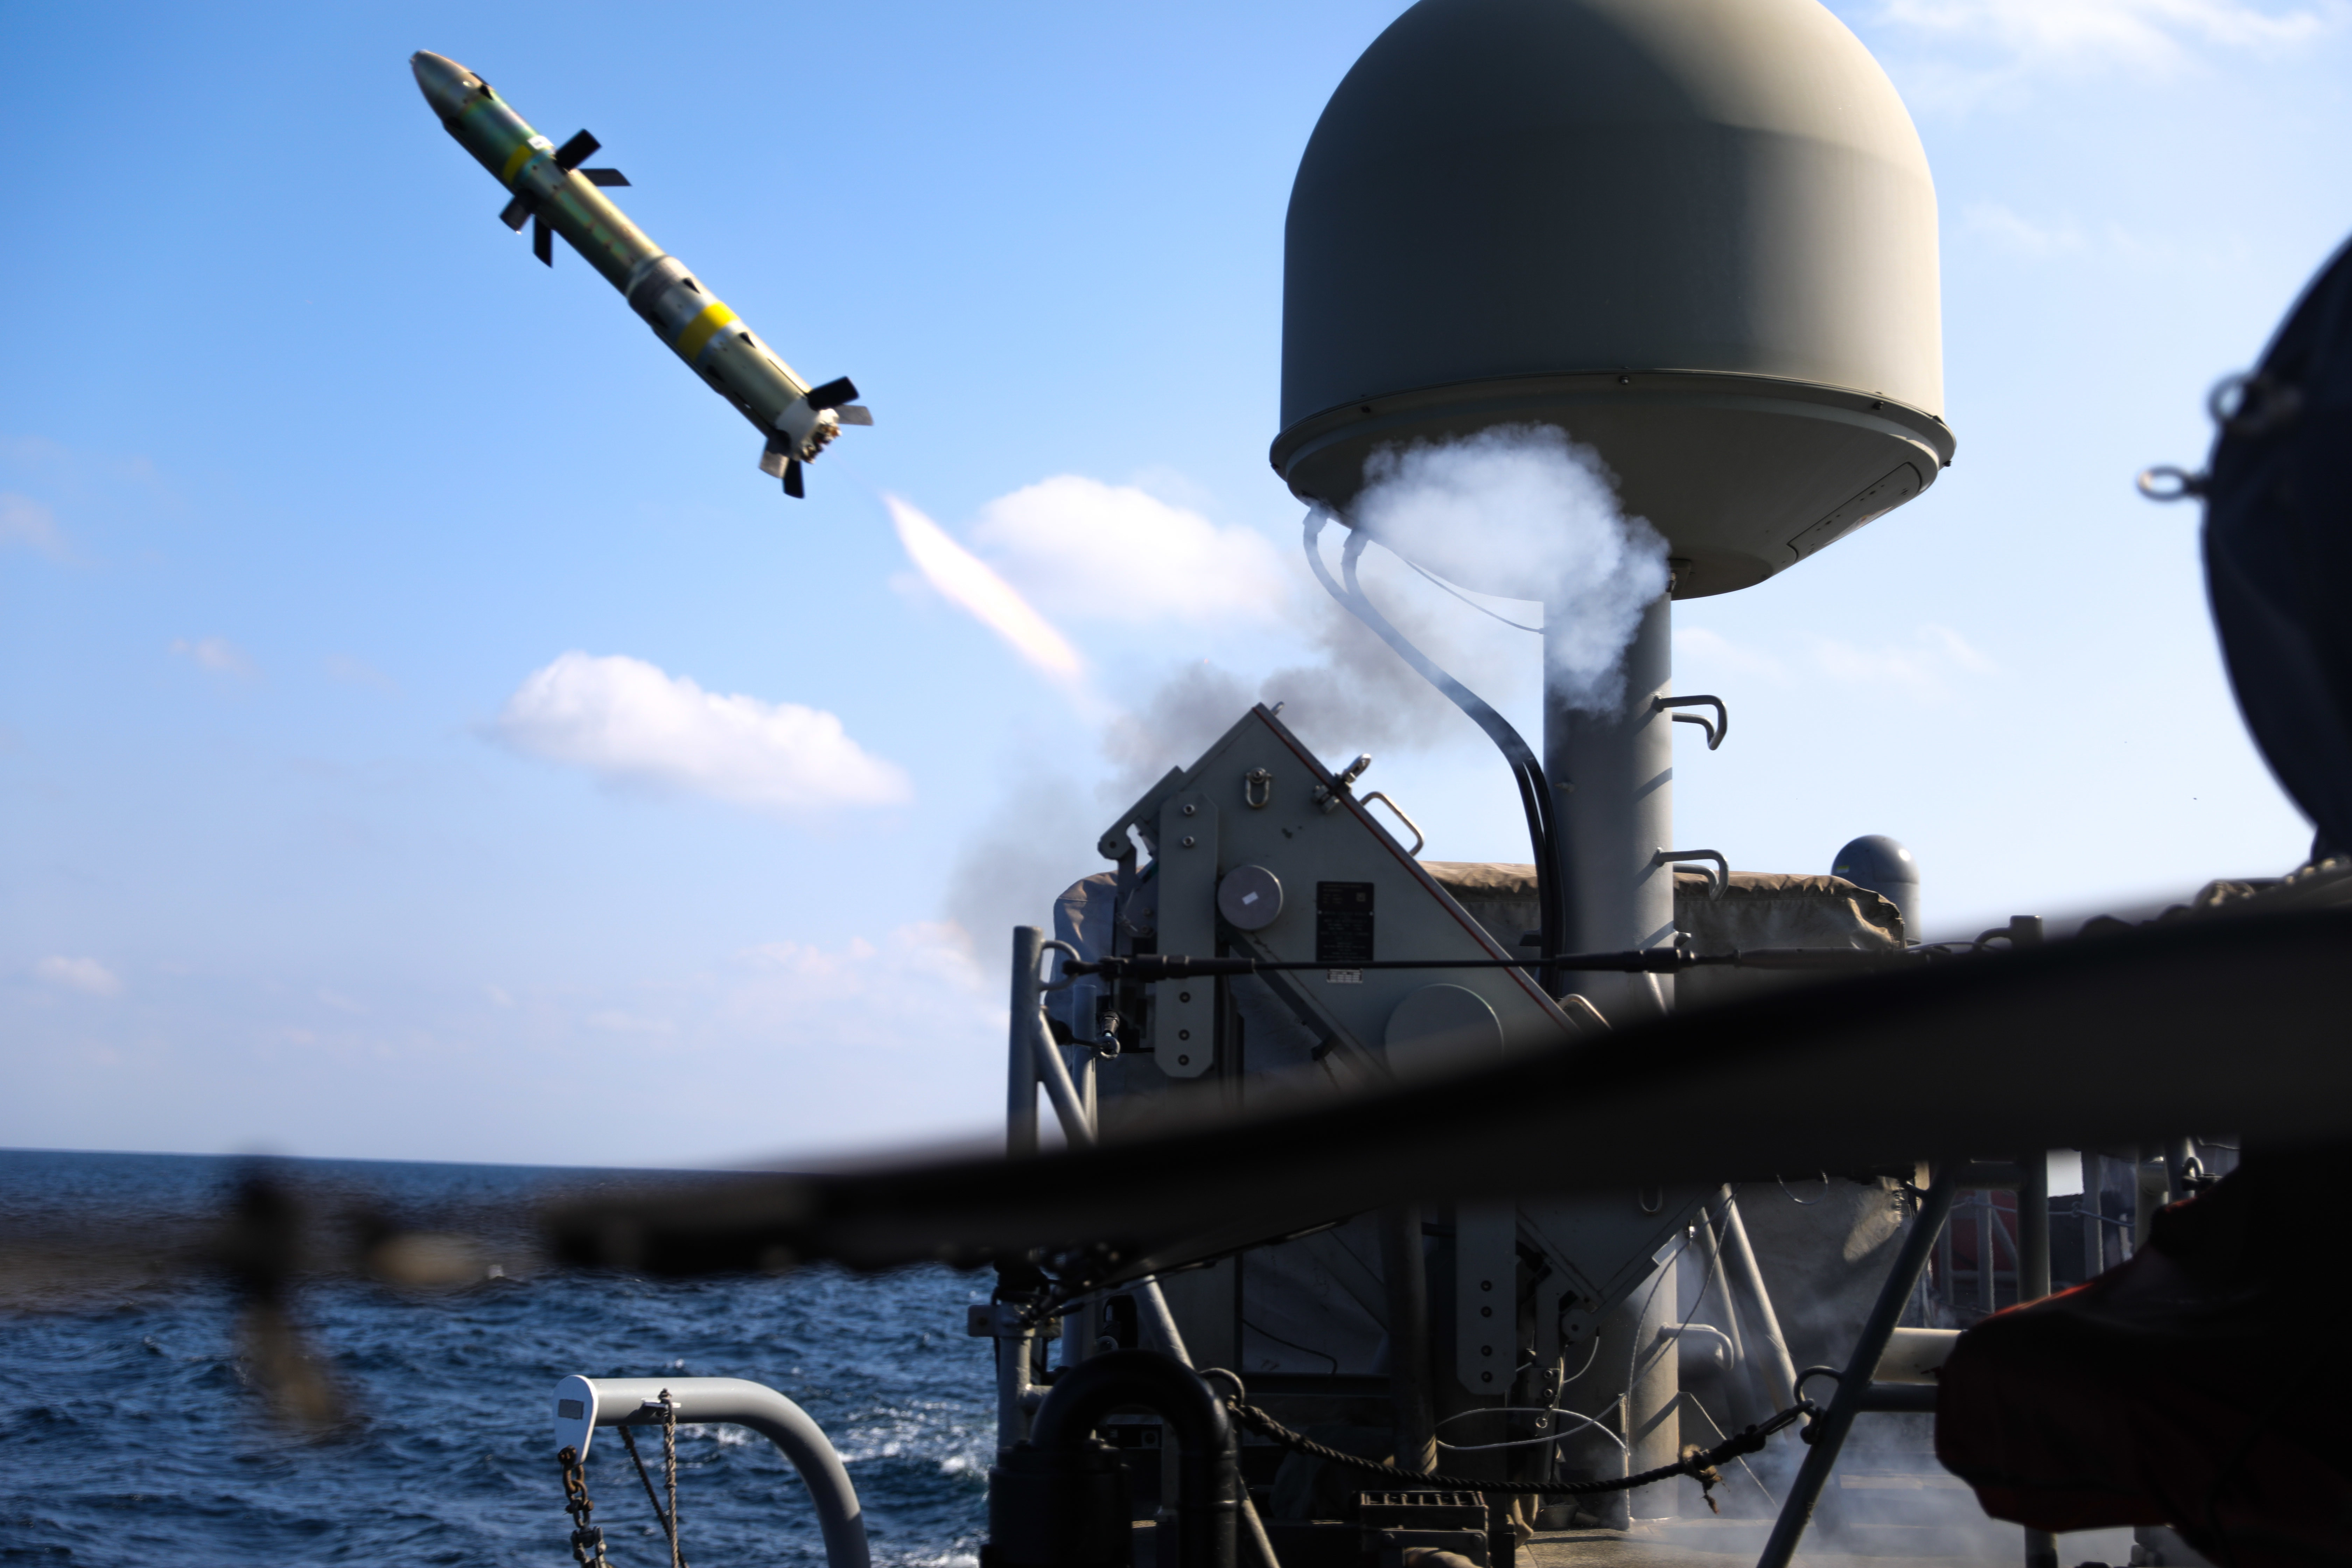 A Griffin missile is launched from the patrol coastal ship USS Whirlwind (PC 11) during a test of the MK-60 Griffin guided-missile system. The exercise demonstrated a proven capability for the ships to defend against small boat threats and ensure maritime security through key chokepoints in the U.S. Central Command area of responsibility. 